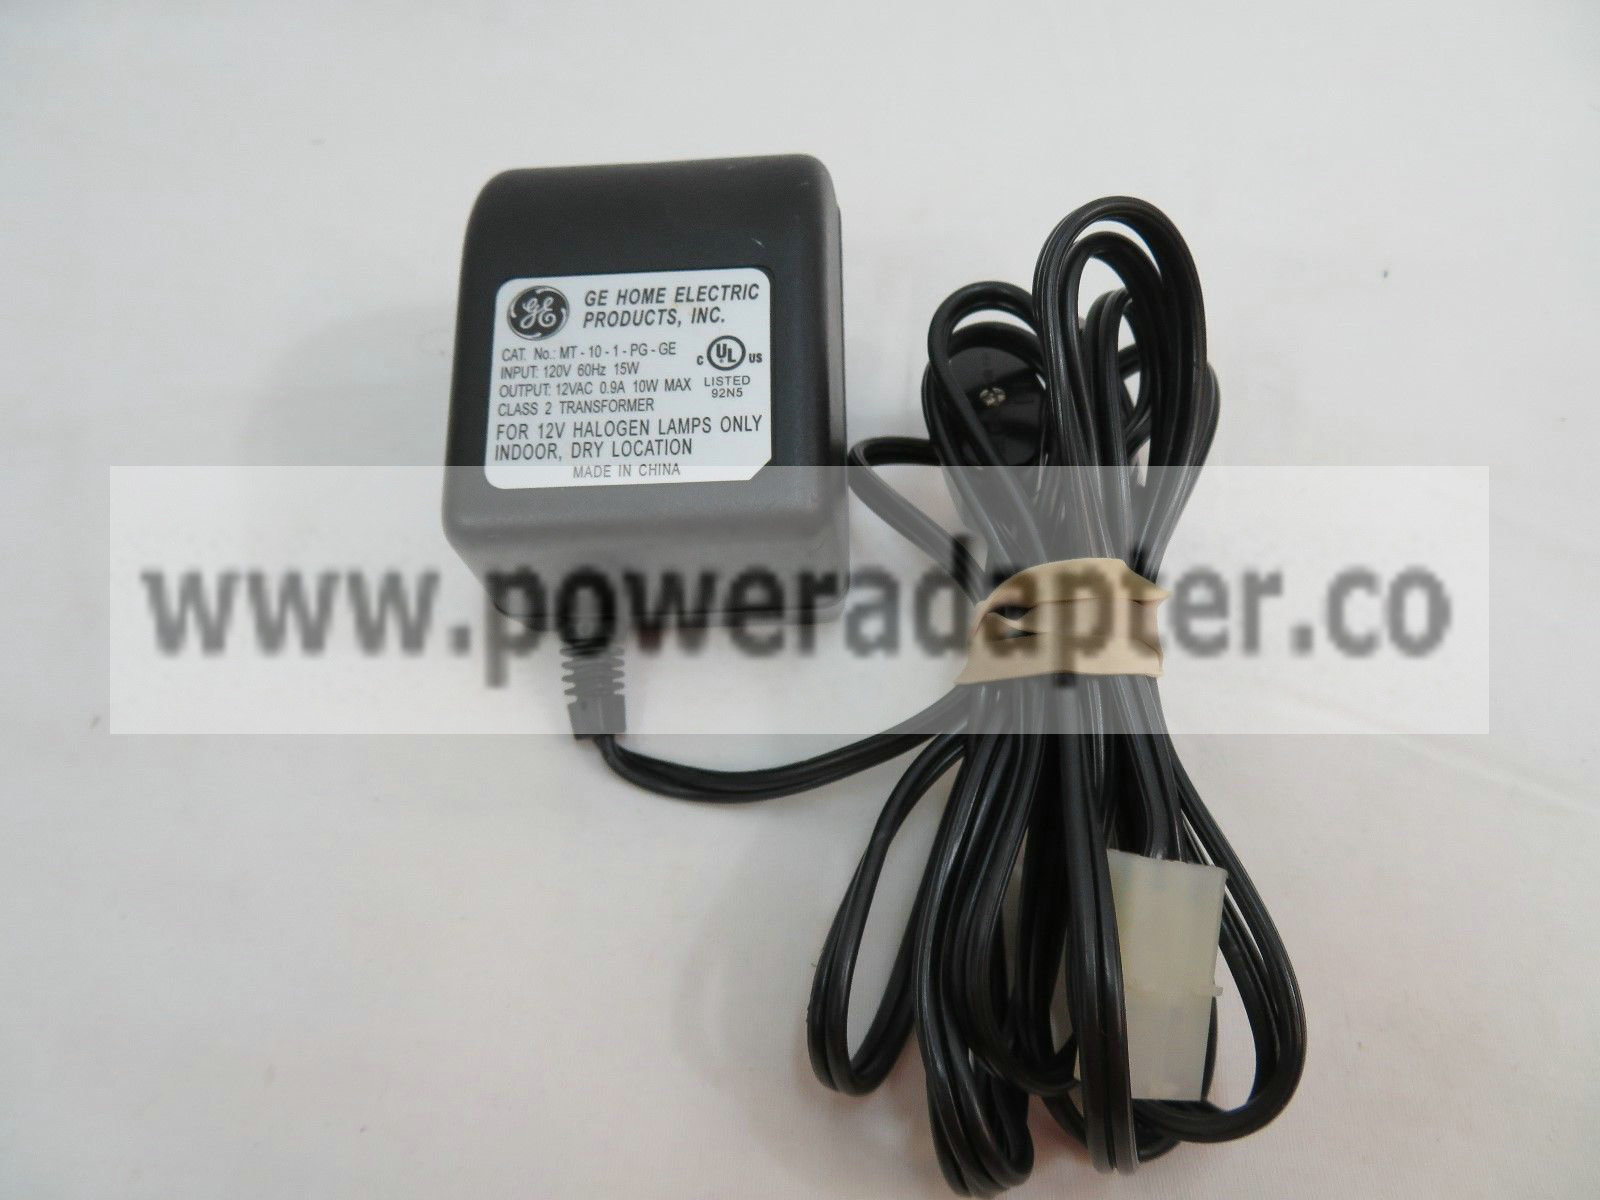 GE AC Adapter Power Supply 12VAC 0.9A Cat. MT-10-1-PG-GE model no:MT-10-1-PG-GE input:120v 60hz, 15w output:12VAC 0.9 - Click Image to Close